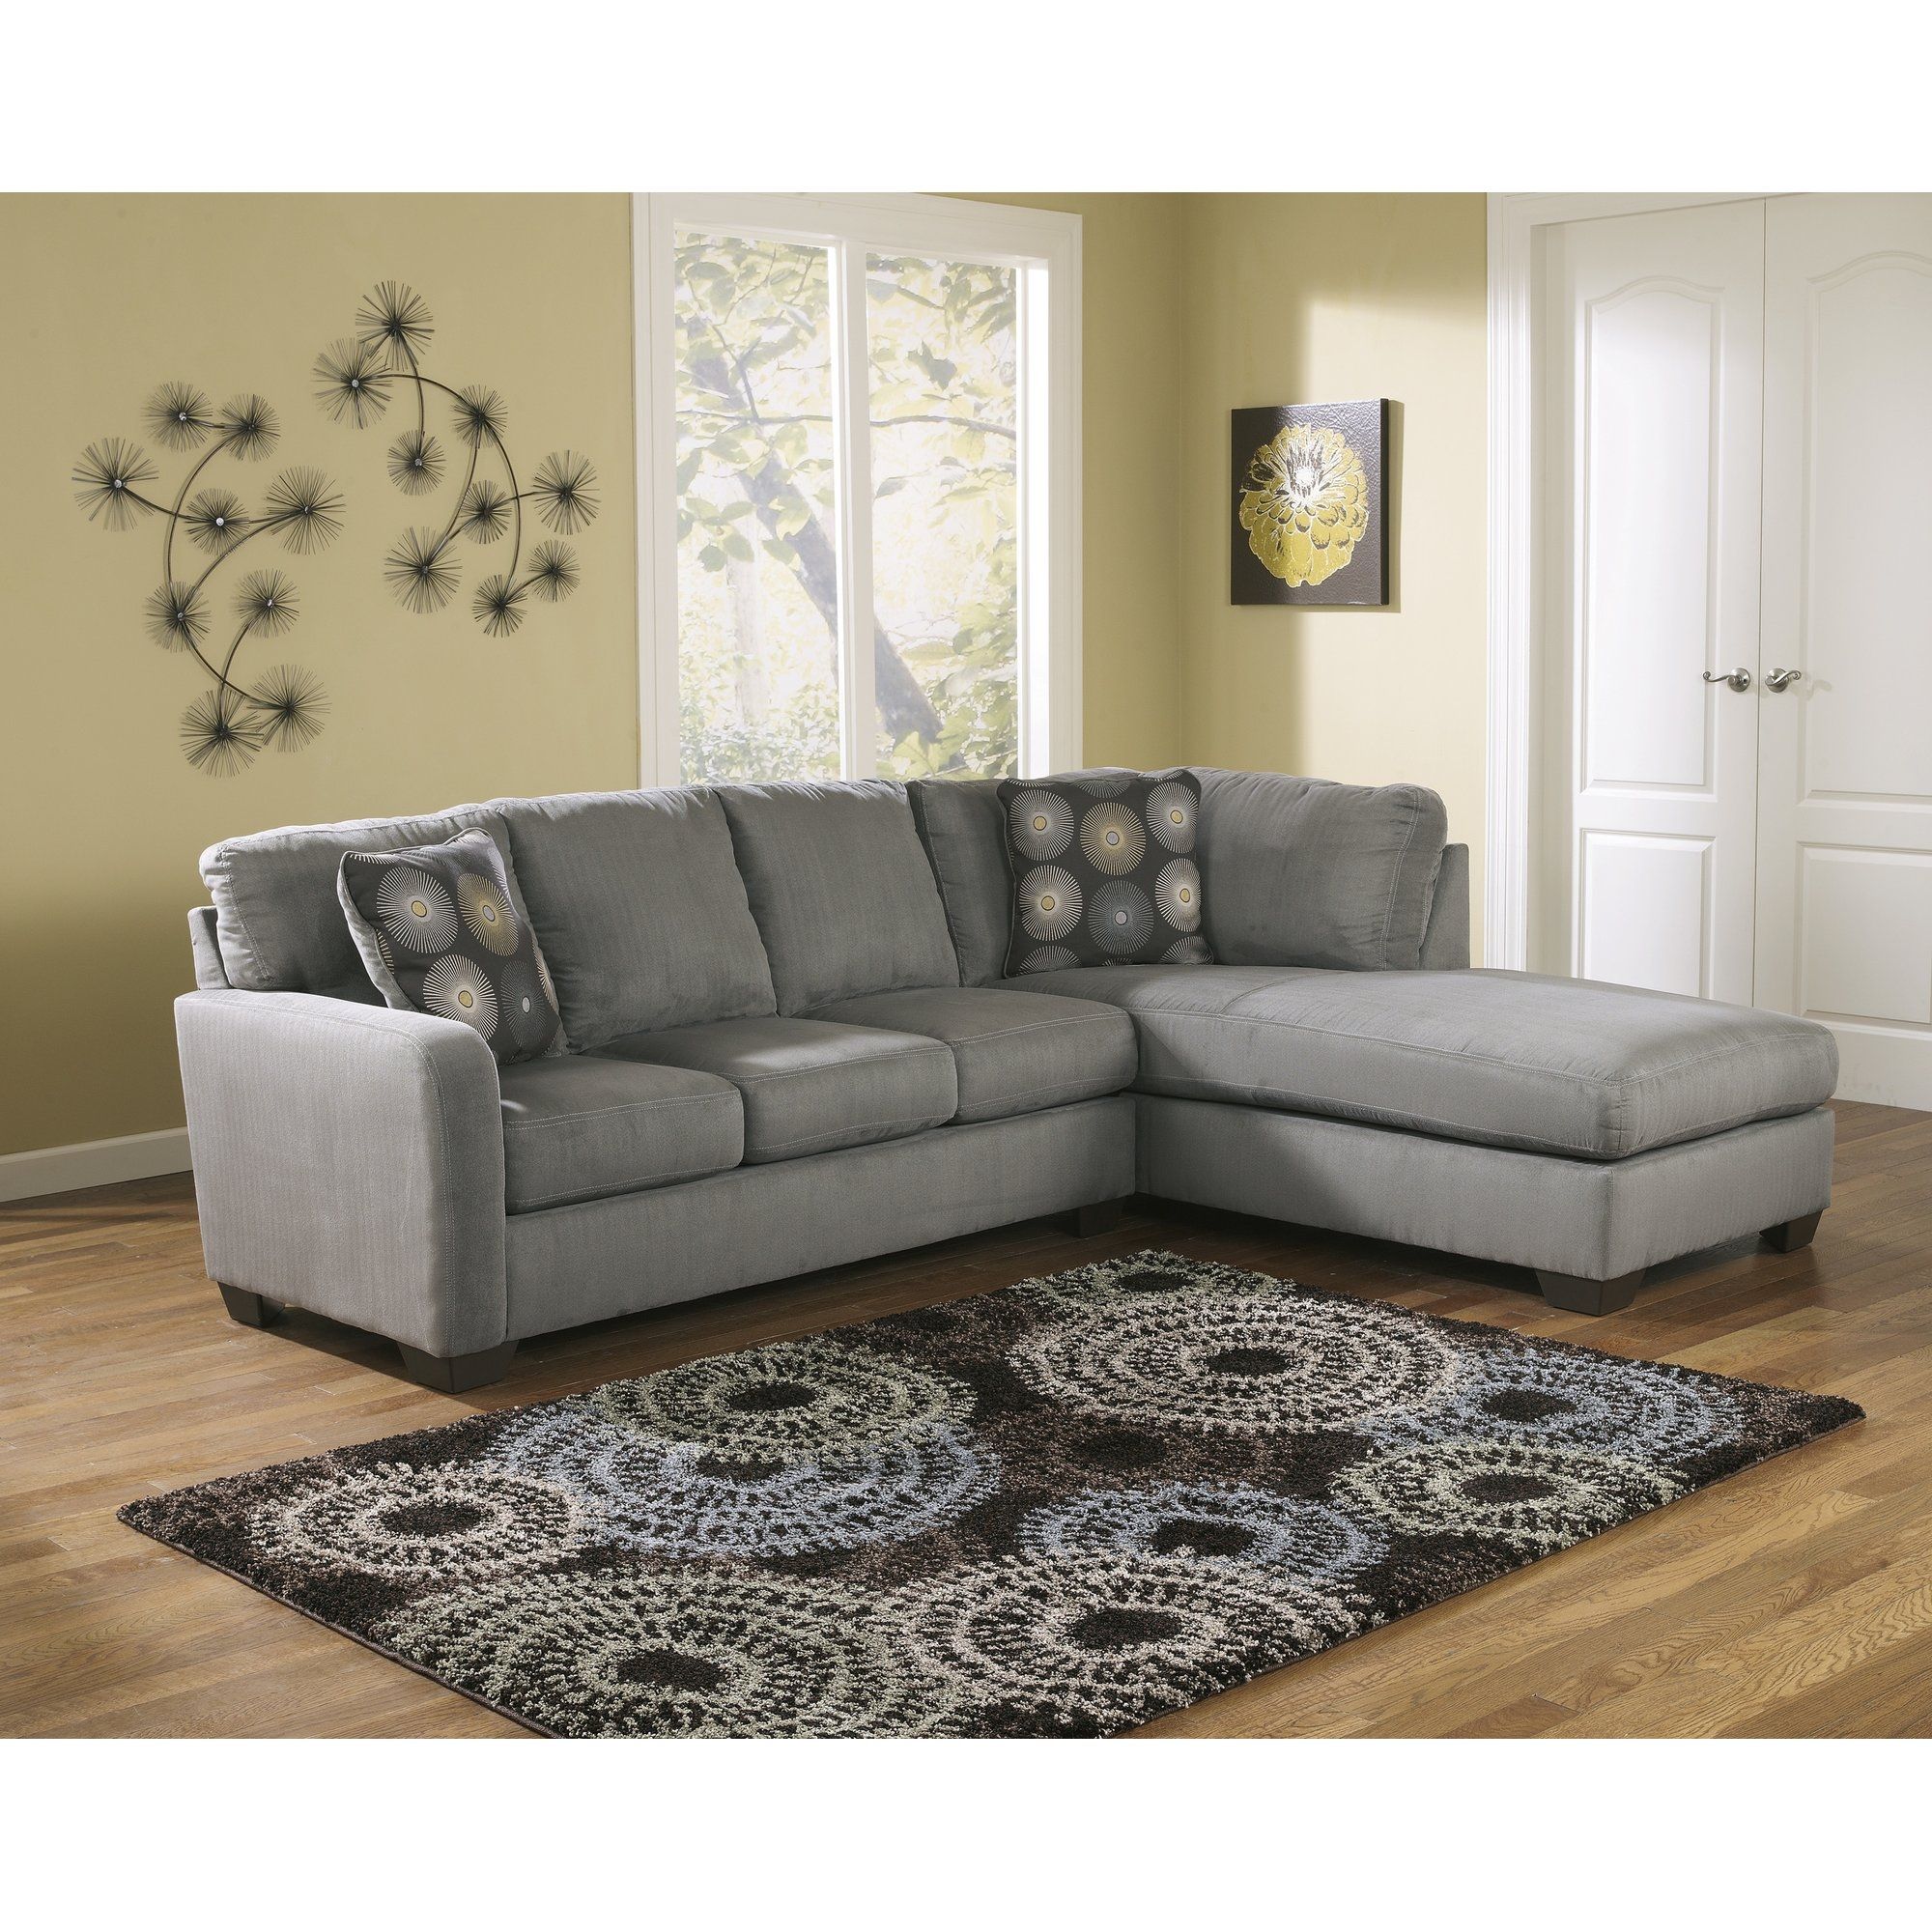 Made In The Usa Sectional Sofas Youll Love Wayfair Pertaining To American Made Sectional Sofas (View 6 of 15)